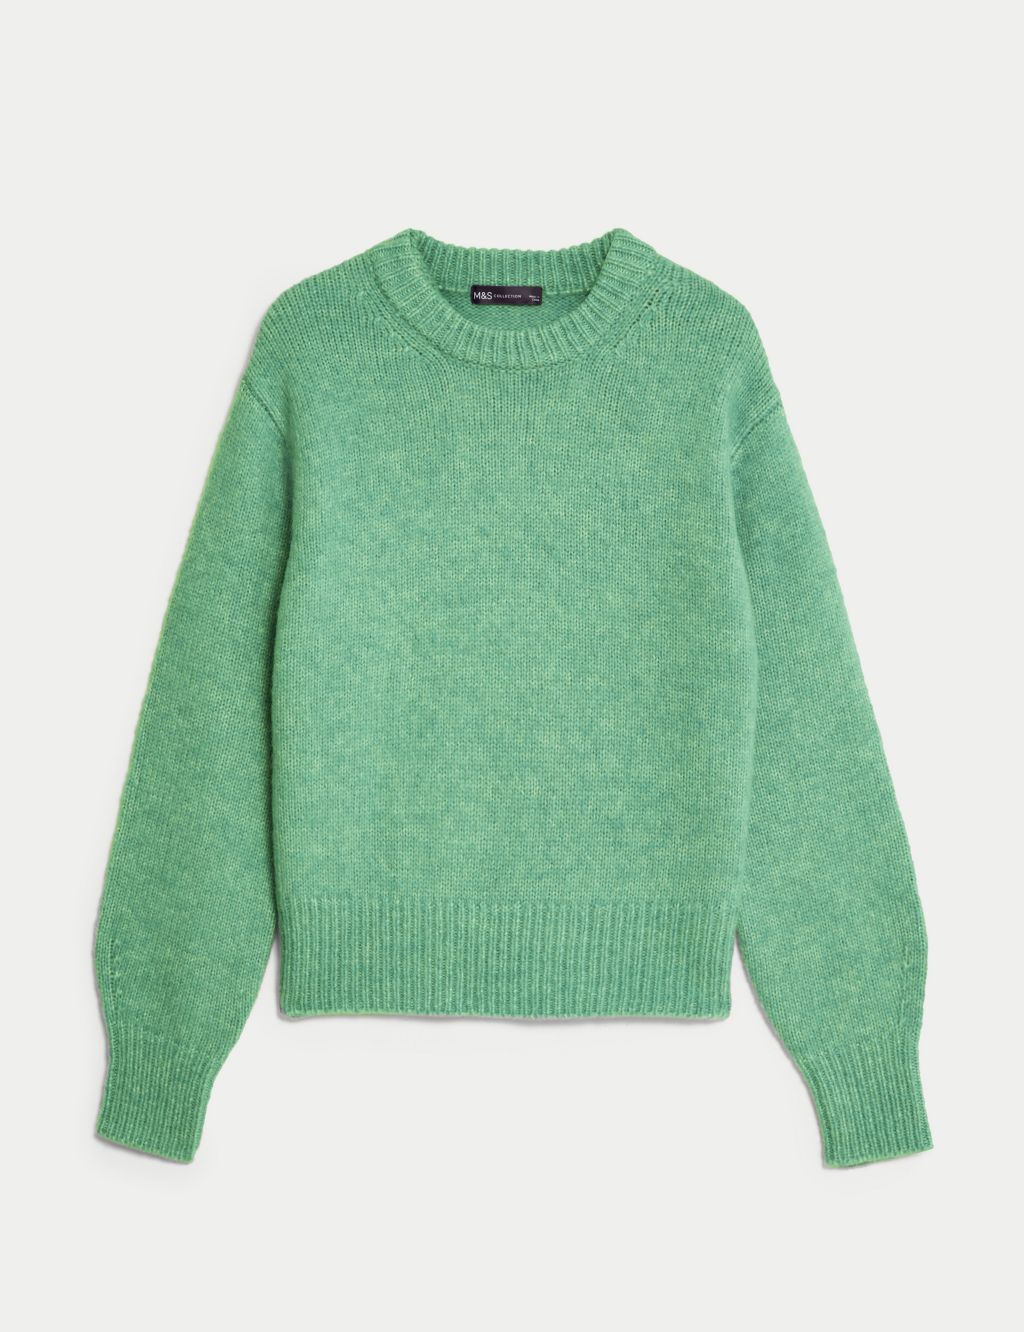 Crew Neck Jumper with Wool image 2